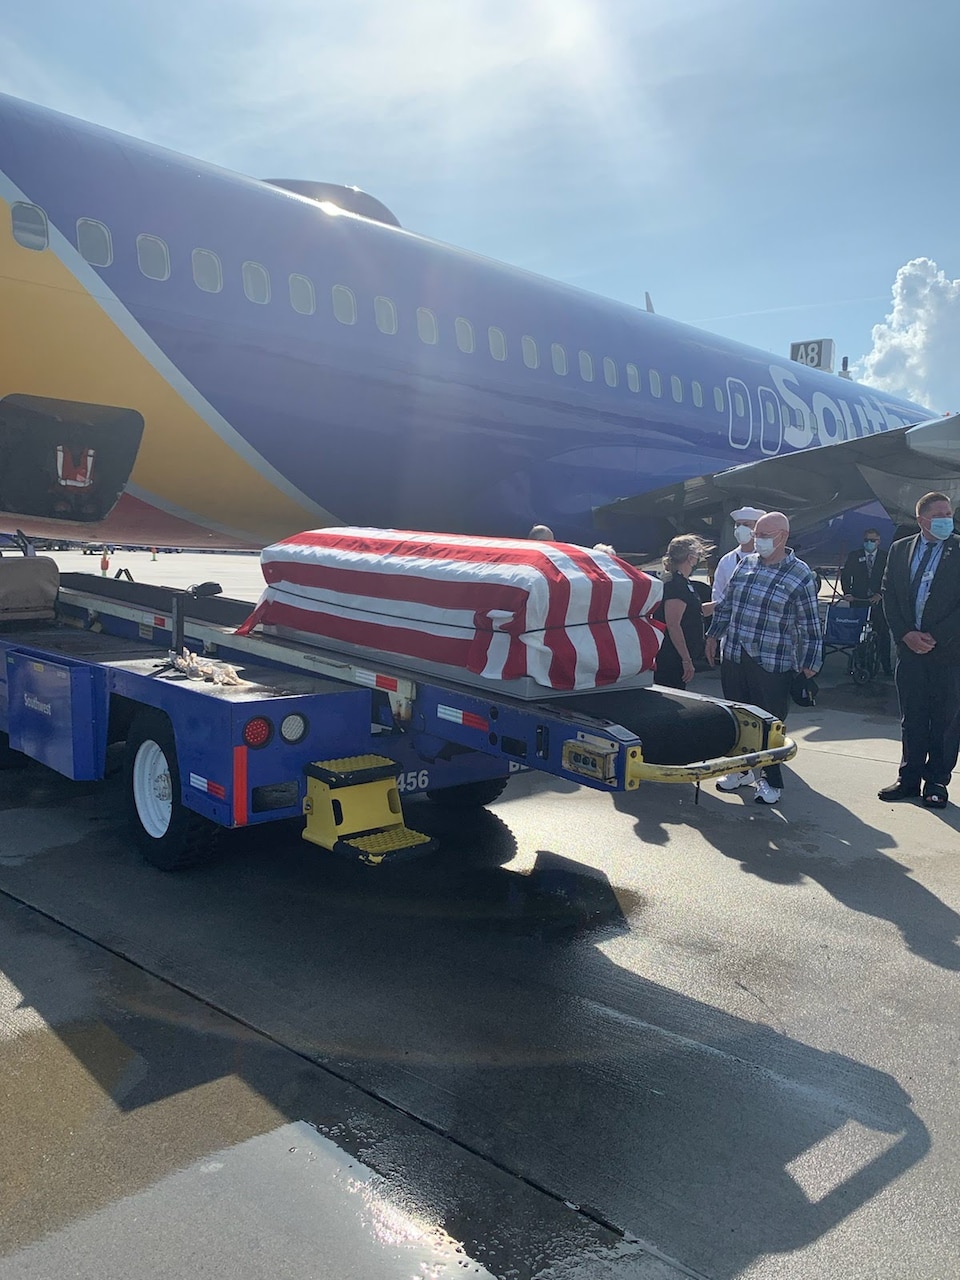 210715-N-ZZ999-001 (July 15, 2021) Raleigh NC. - 84-year-old Cecil Jeffers of Cary, NC, greets the remains of Navy Seaman Second Class Russell Orville Ufford of Kansas City, Missour at the Raleigh-Durham International Airport in Raleigh NC on July 15, 2021. Ufford was killed during the attack on Pearl Harbor, December 7, 1941, and he was identified in February this year. His nephew ,Jeffers, is Ufford�s only known next of kin.(US Navy photo by EO2 Katrena Hovatter)